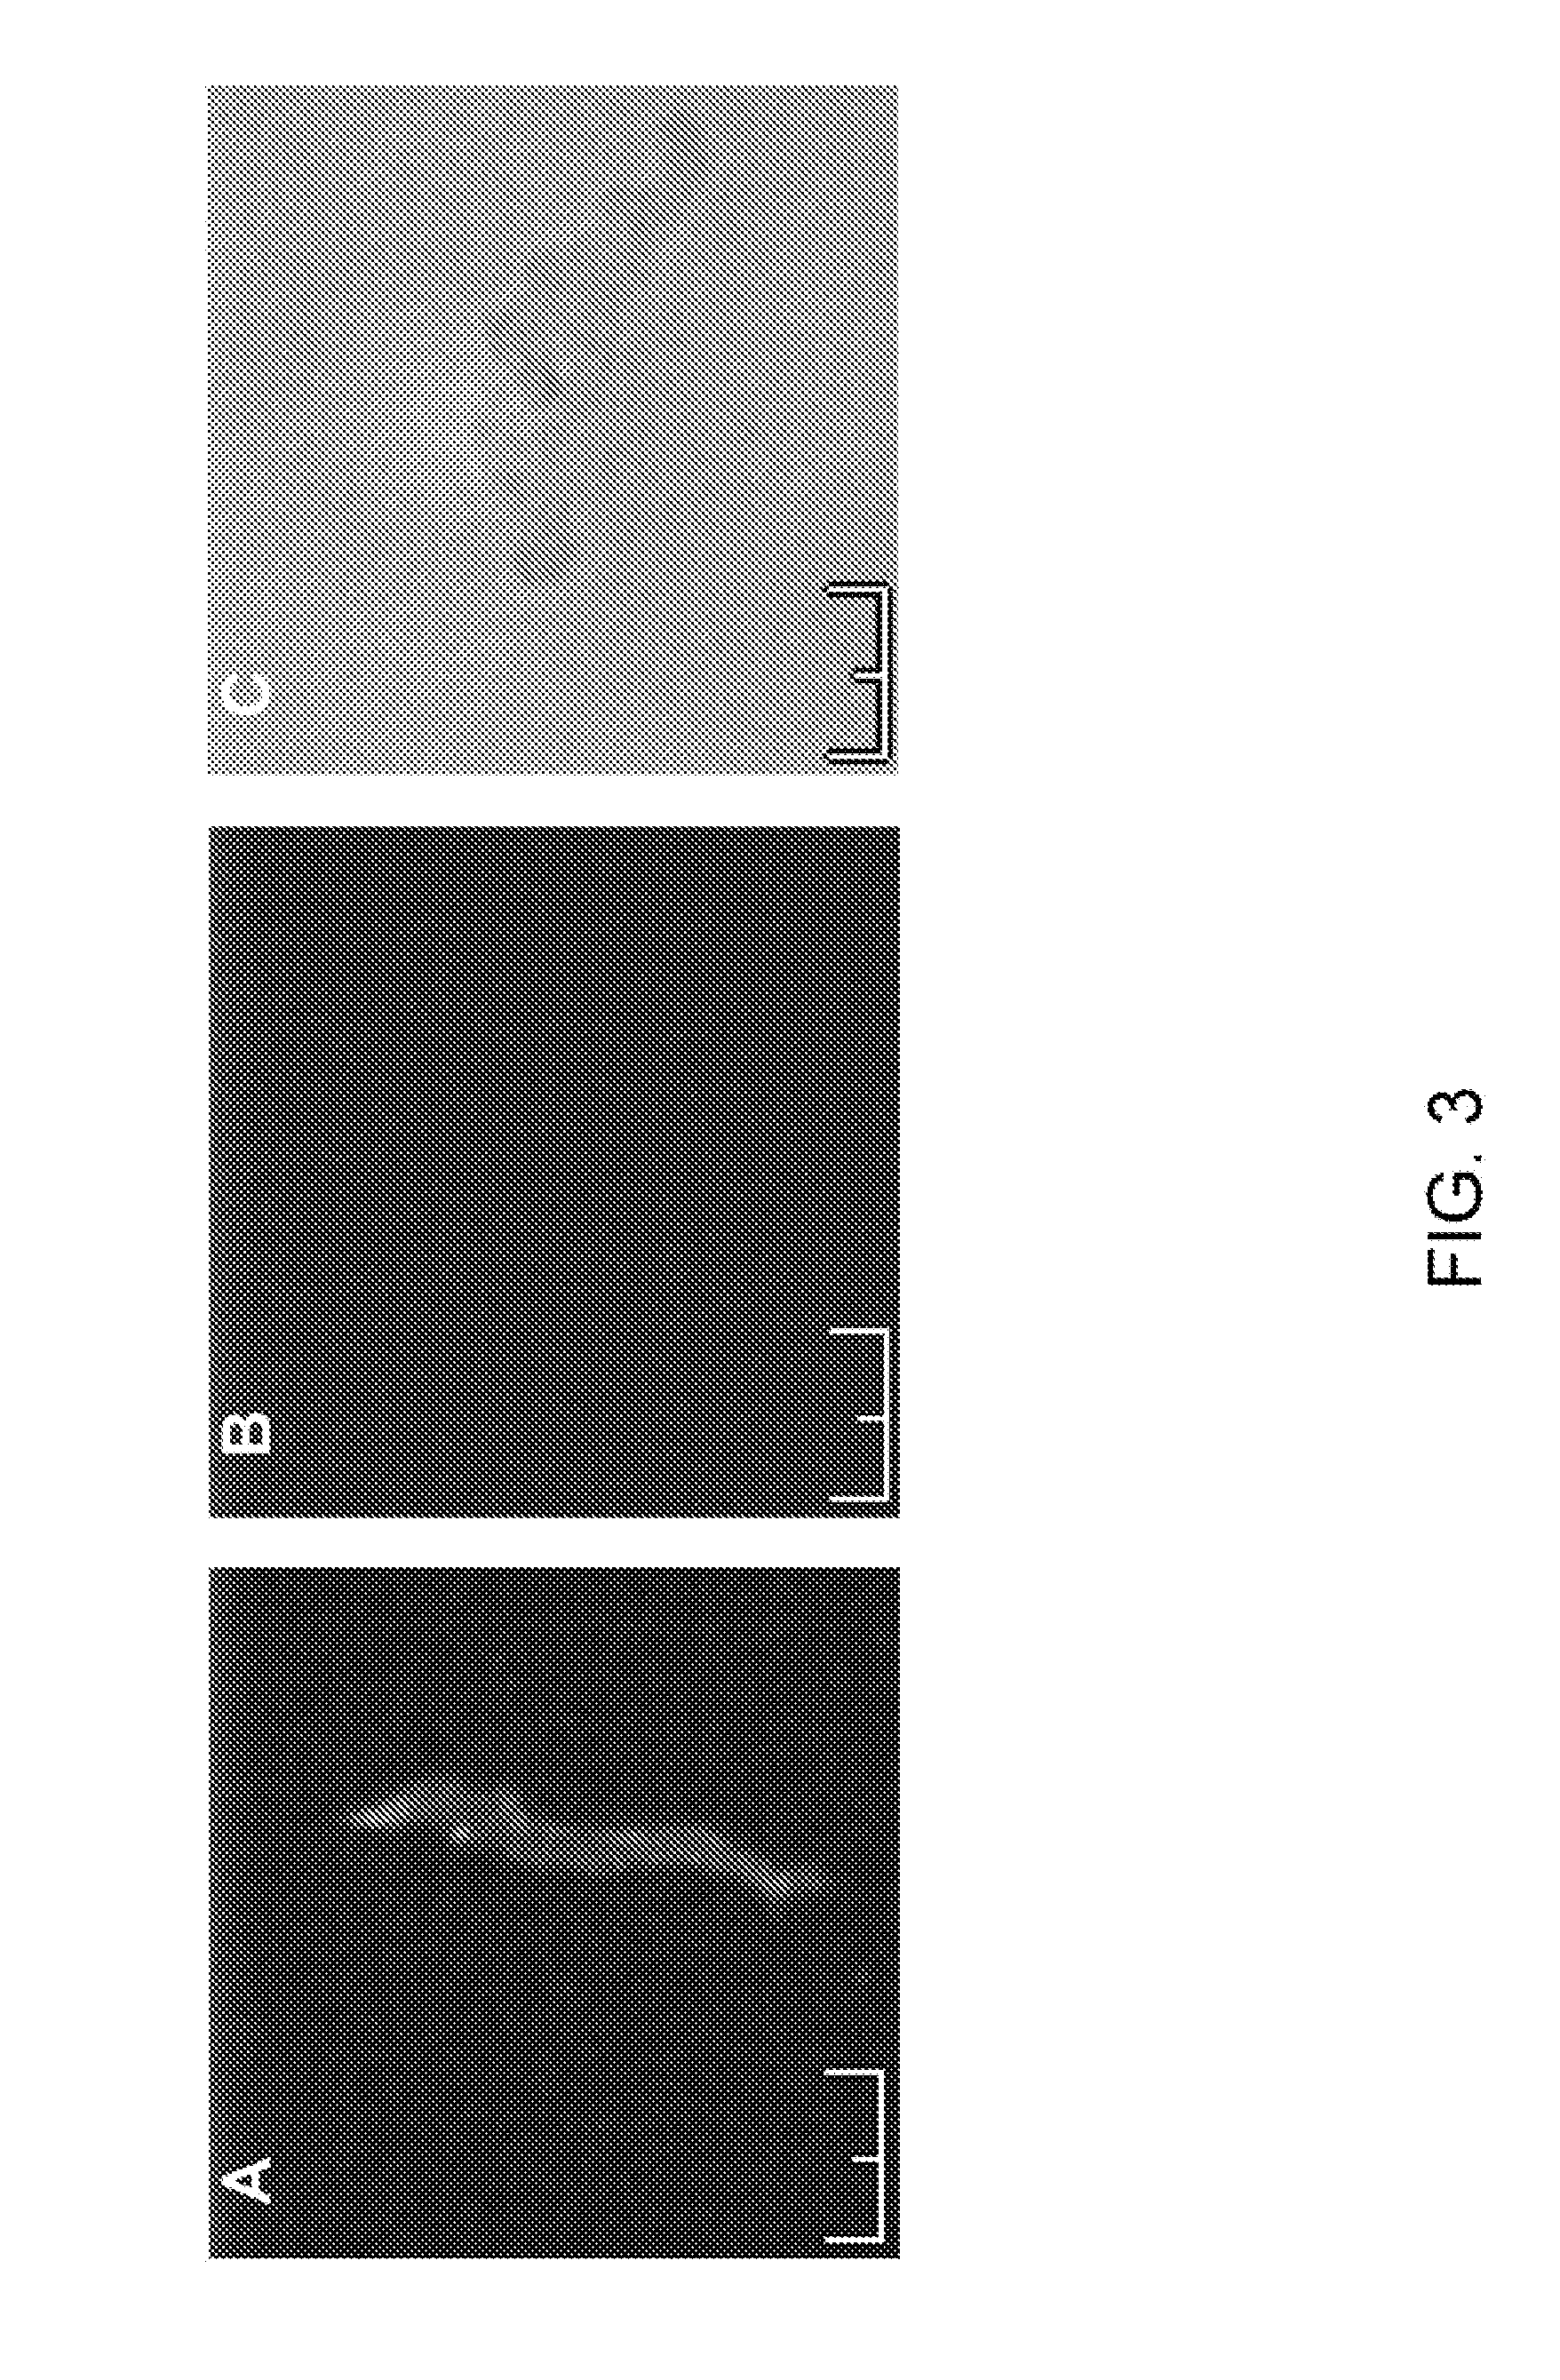 Methods of using proteinacious channels to identify pharmaceutical treatments and risks, and treatments resulting therefrom